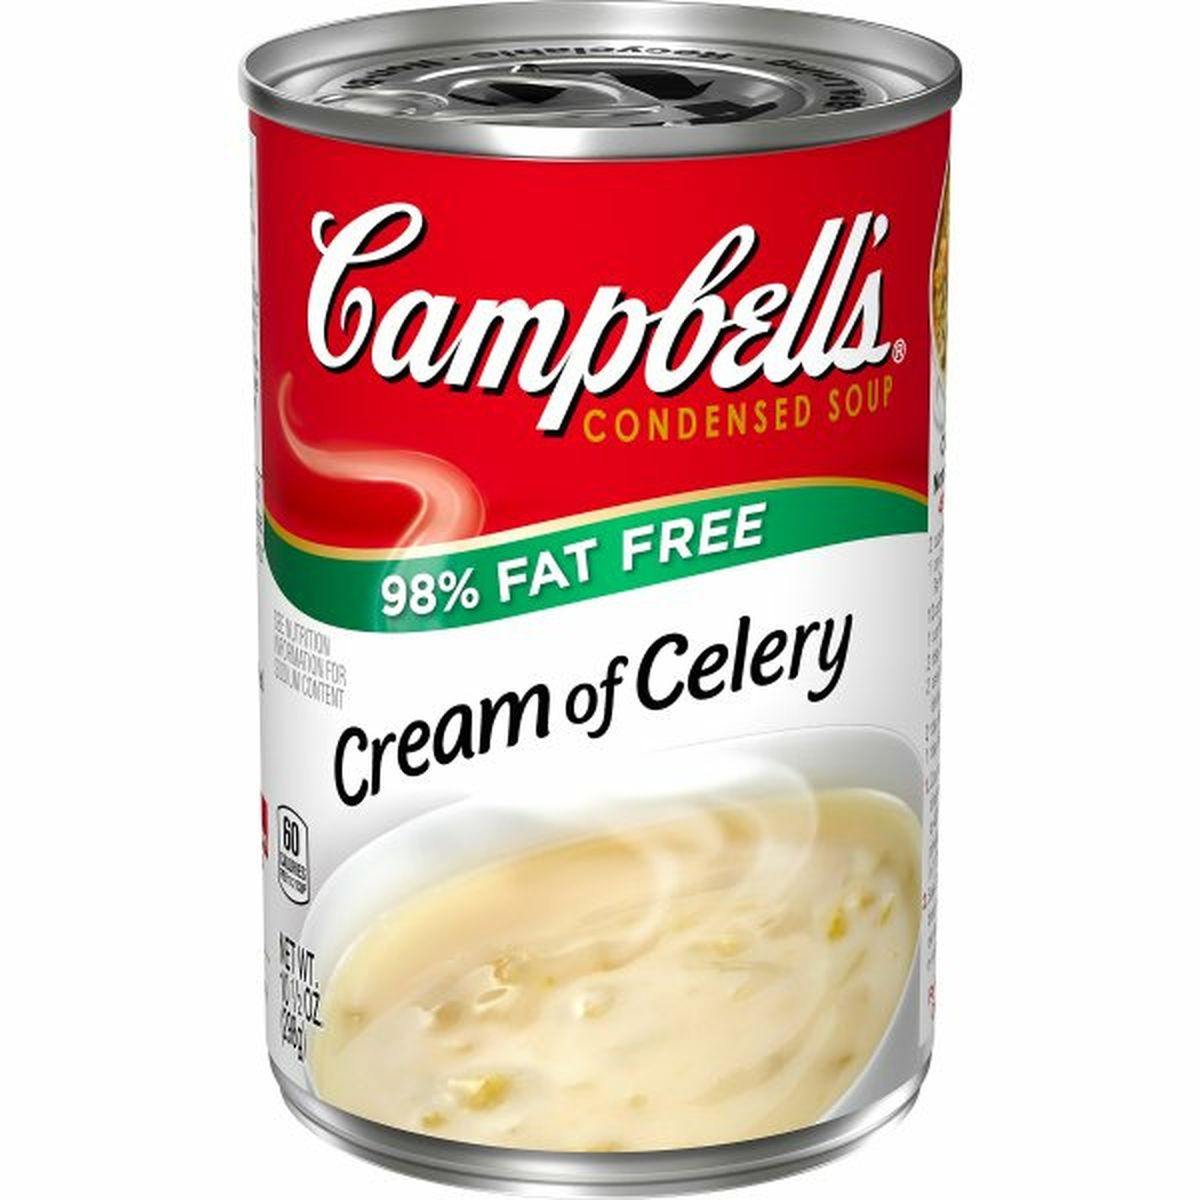 Calories in Campbell'ss Condensed 98% Fat Free Cream of CelerySoup